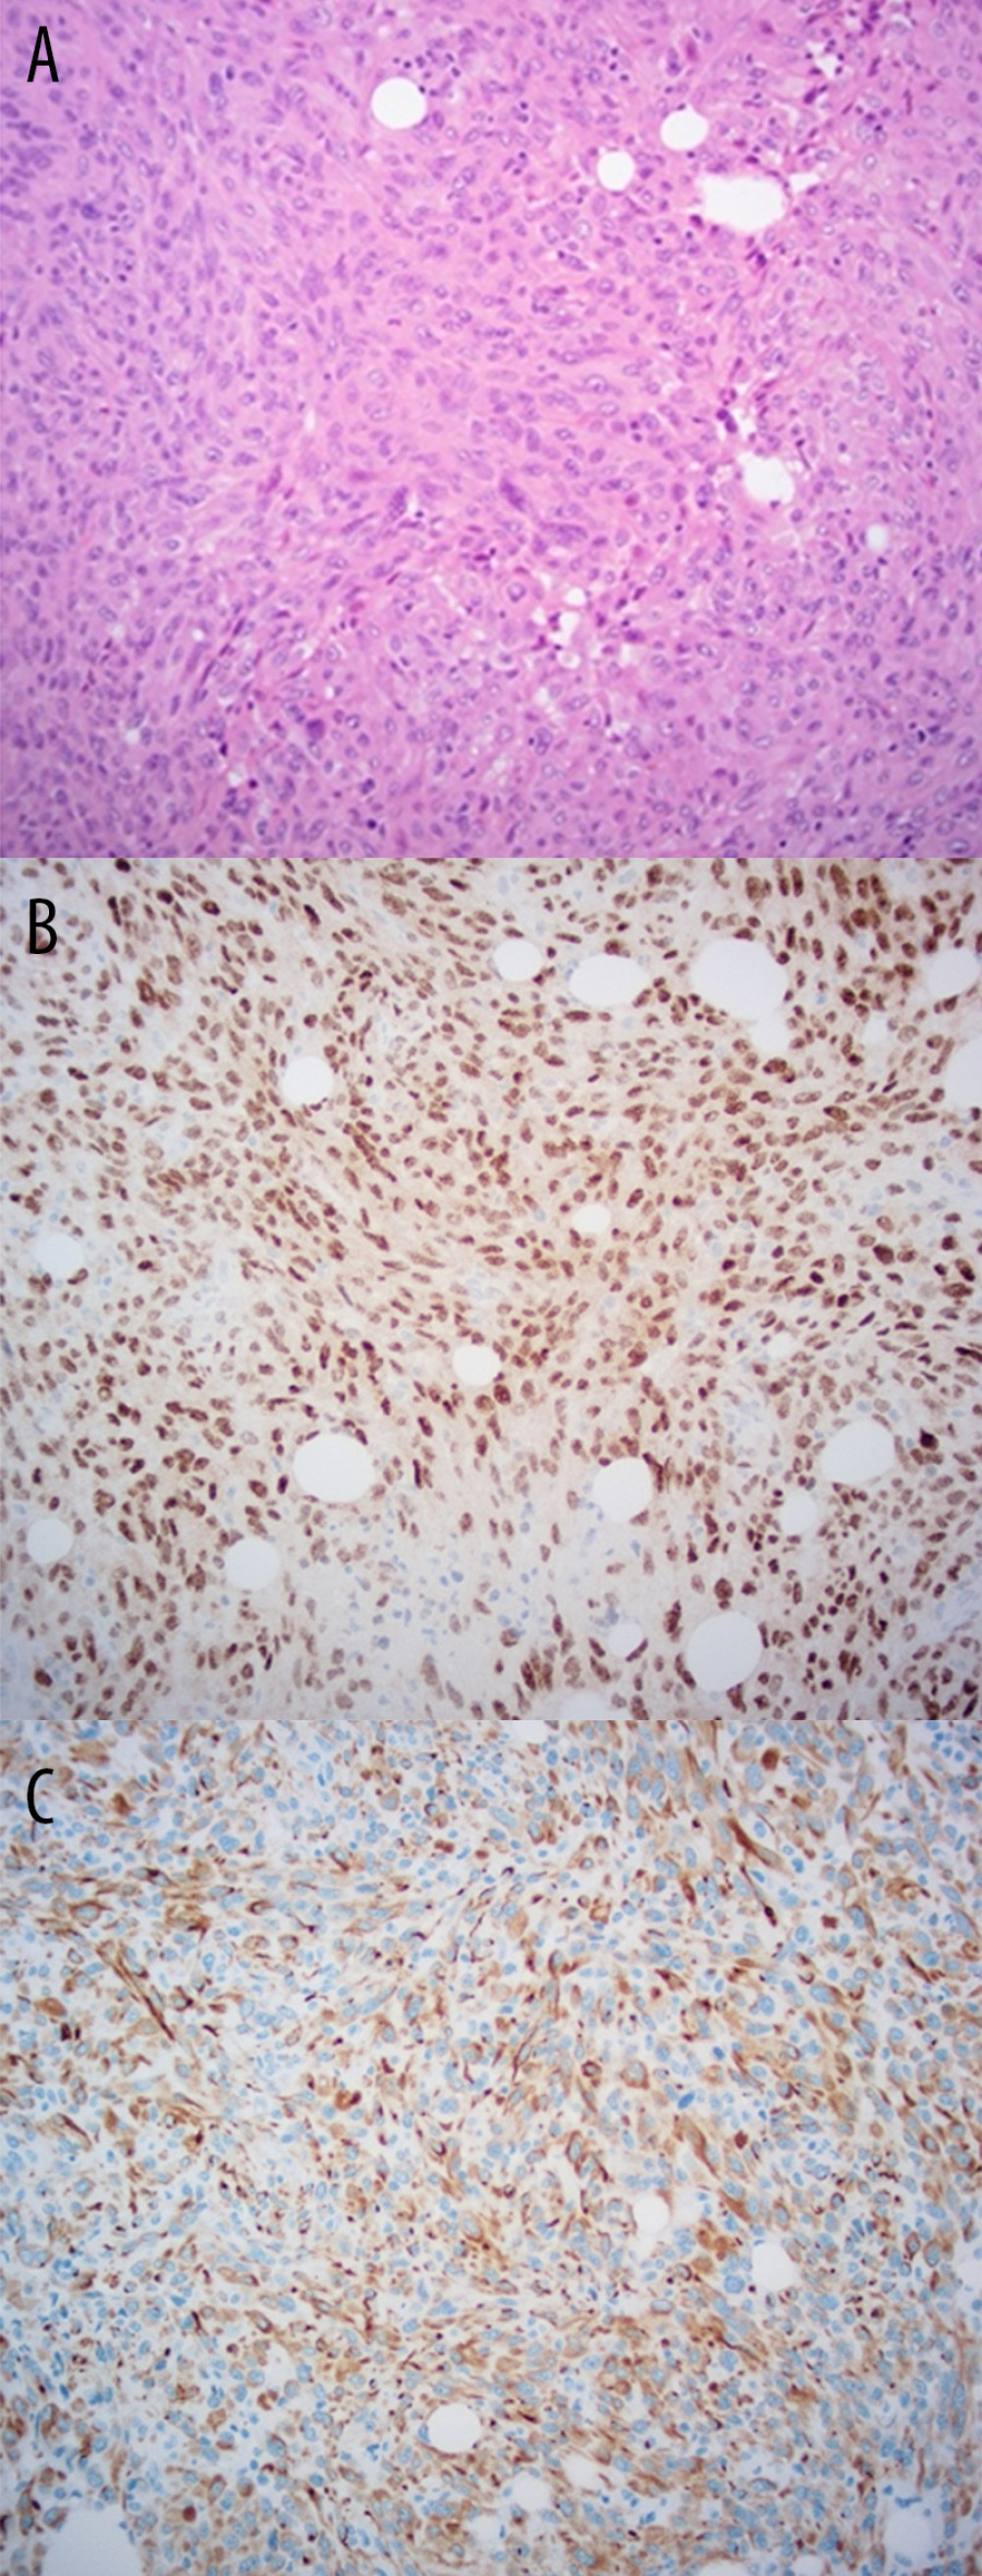 (A) Hematoxylin- and eosin-stained biopsy specimen from L4 vertebra (2020) showing a high-grade malignant tumor, ×200 magnification. Immunohistochemical staining for (B) Pax8 and (C) CK7.